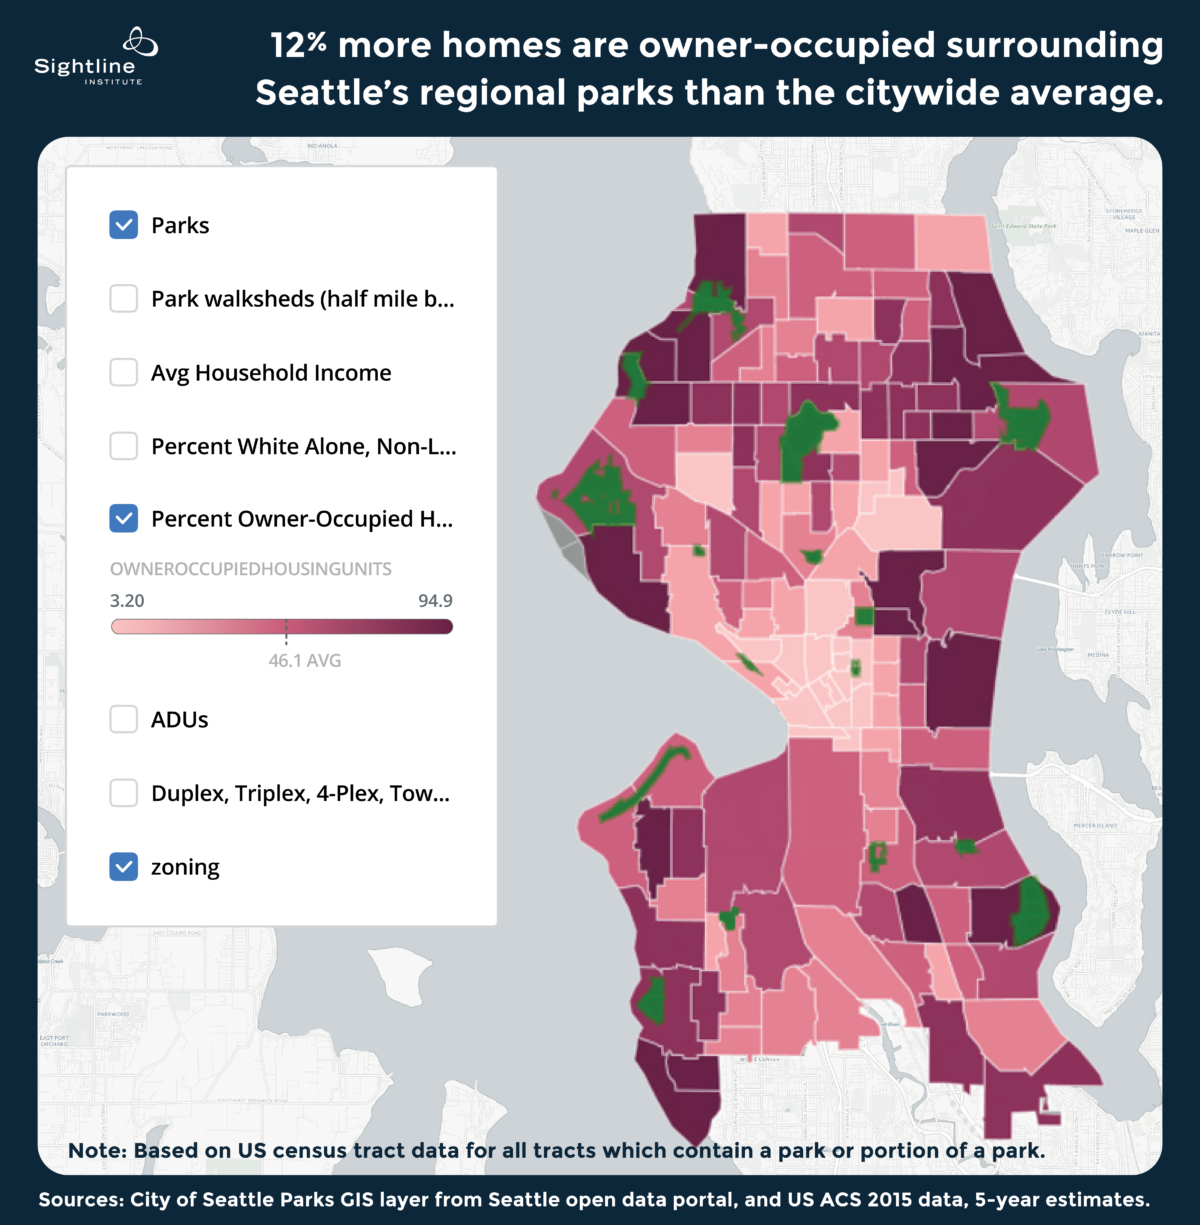 Seattle’s regional parks, shown in green, are surrounded by owner-occupied housing. The city’s census tracts are color-coded based on the percentage of owner-occupied housing units, with darkest pink tracts having 85 percent or more owner-occupied units and lightest pink tracts having 15 percent or fewer owner-occupied units. Original Sightline Institute graphic, available under our free use policy.